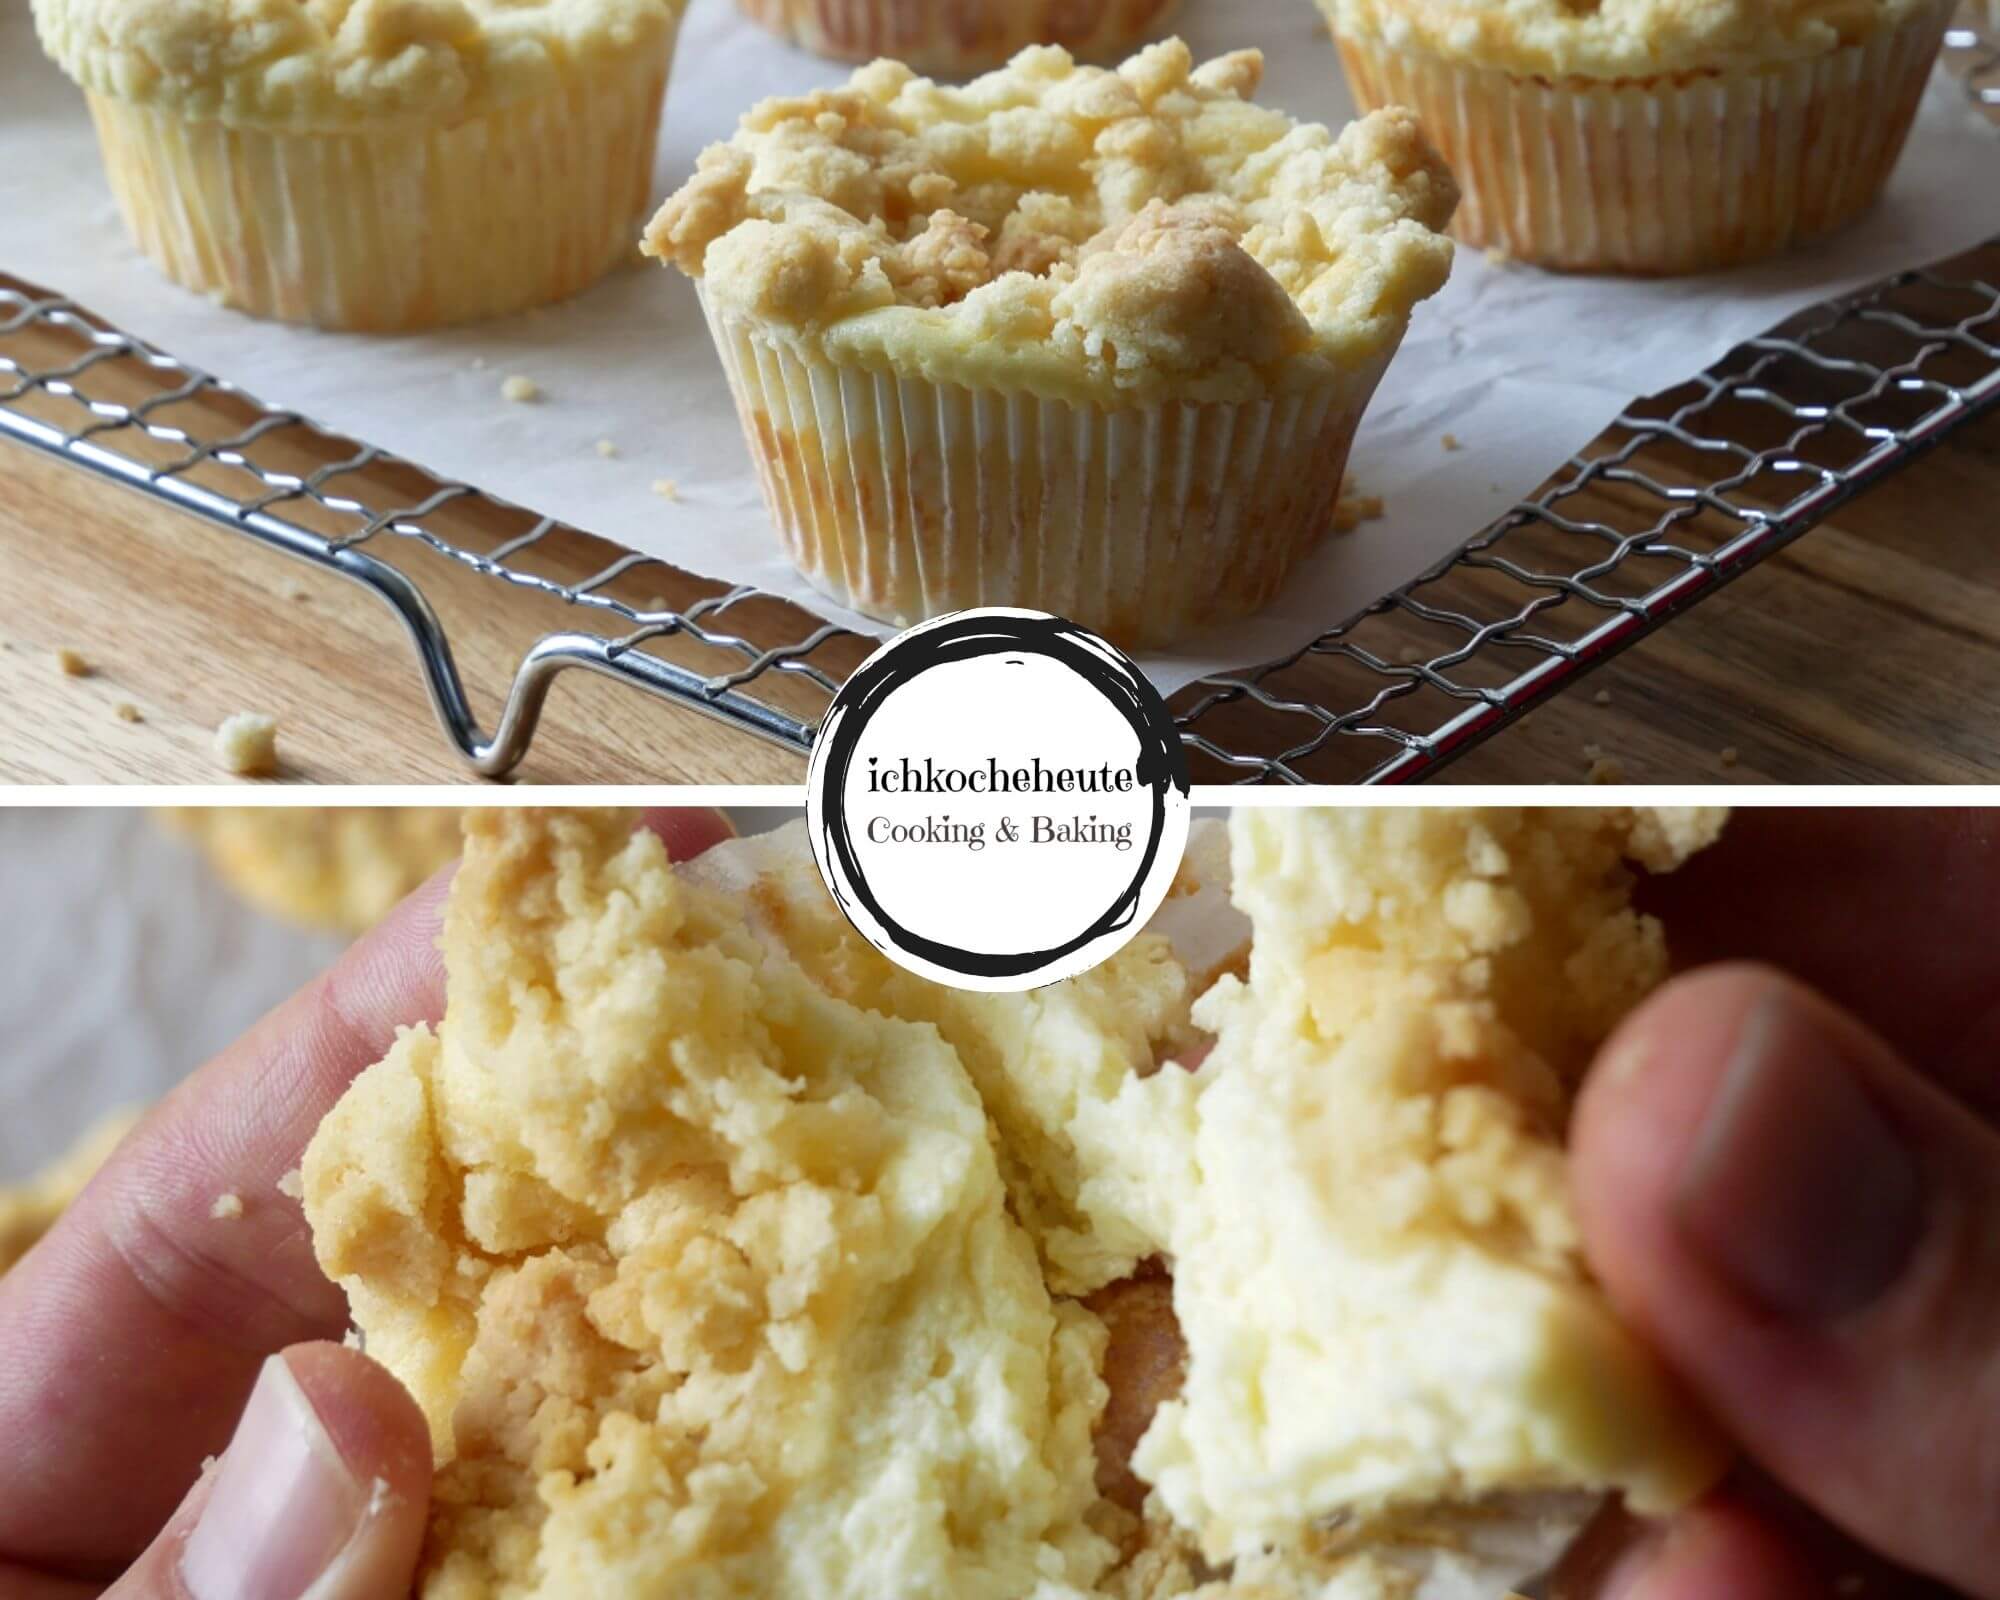 Serving Cheesecake Streusel Muffins